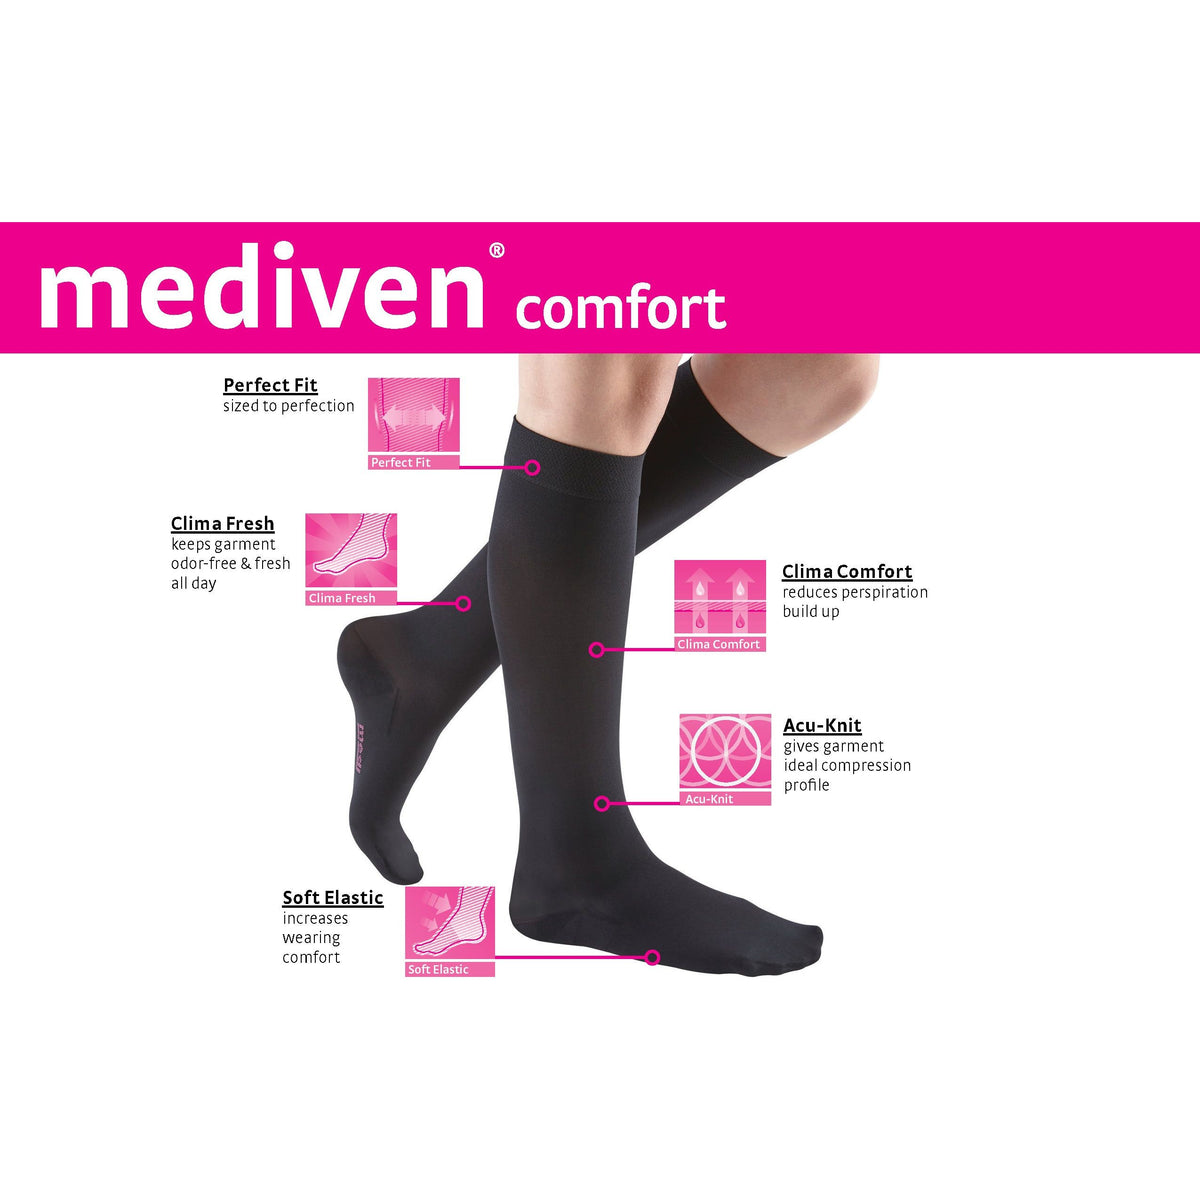 Medi USA Mediven Plus Closed Toe Thigh-High 20-30mmHg Compression Stockings  with Silicone Top